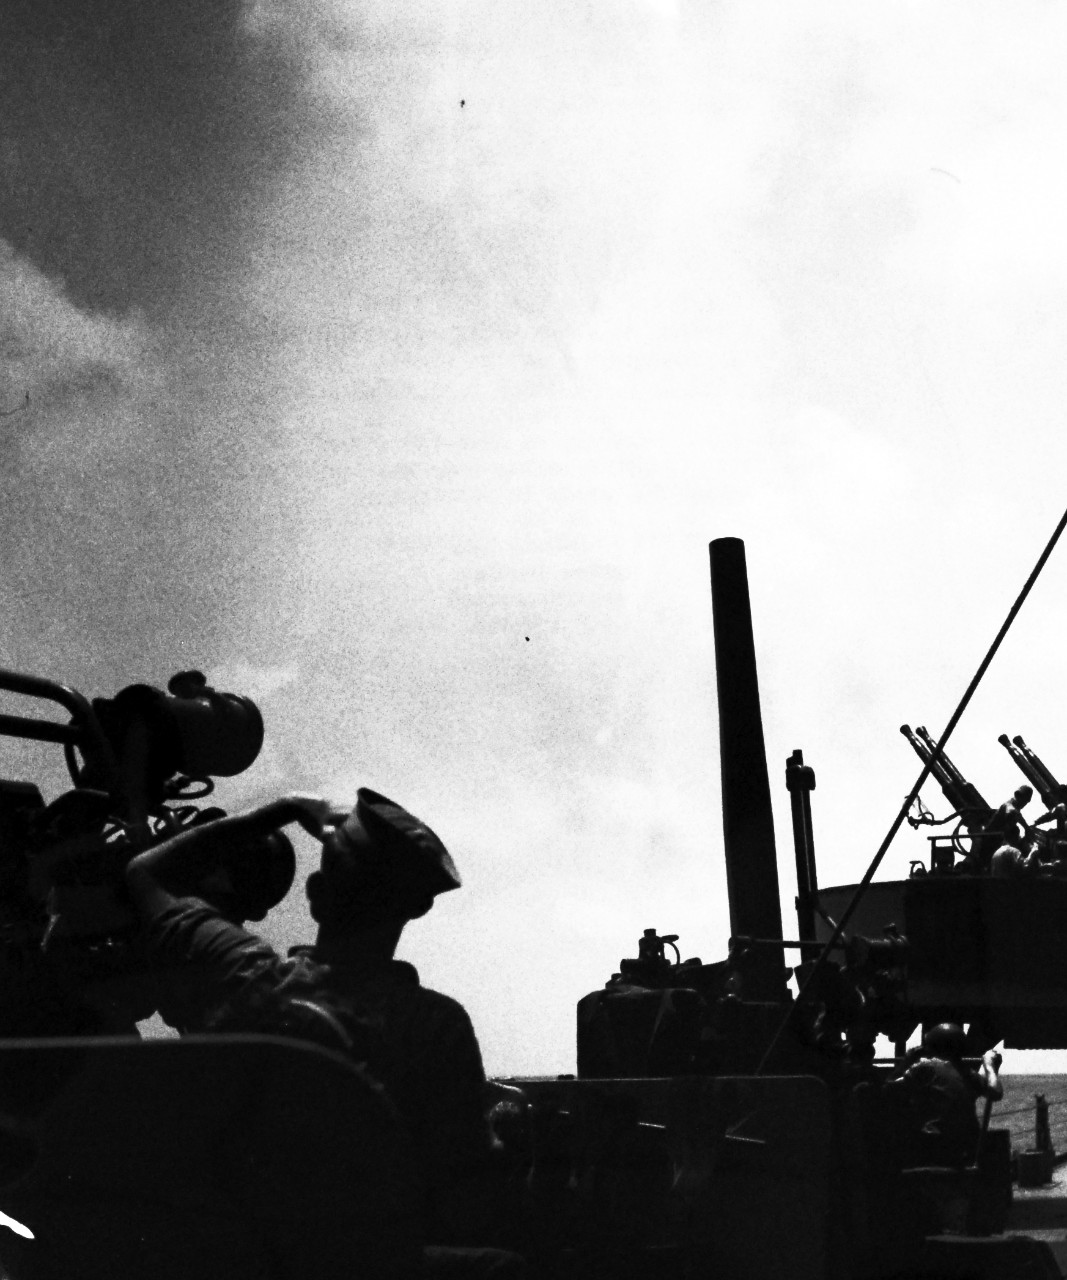 LC-Lot-805-5: Operation Husky - Invasion of Sicily, 9 July – August 17, 1943. Air vs. Sea.  Hurling their deadly answers to the challenge of the Luftwaffe, members of the gun crews onboard a U.S. warship off Sicily eye the skies during the brief intermissions between actions in an air raid.  Note, the anti-aircraft guns to the right.  Photograph released August 17, 1943.  Photographed through Mylar sleeve. U.S. Navy Photograph.  Courtesy of the Library of Congress.  (2015/10/30).